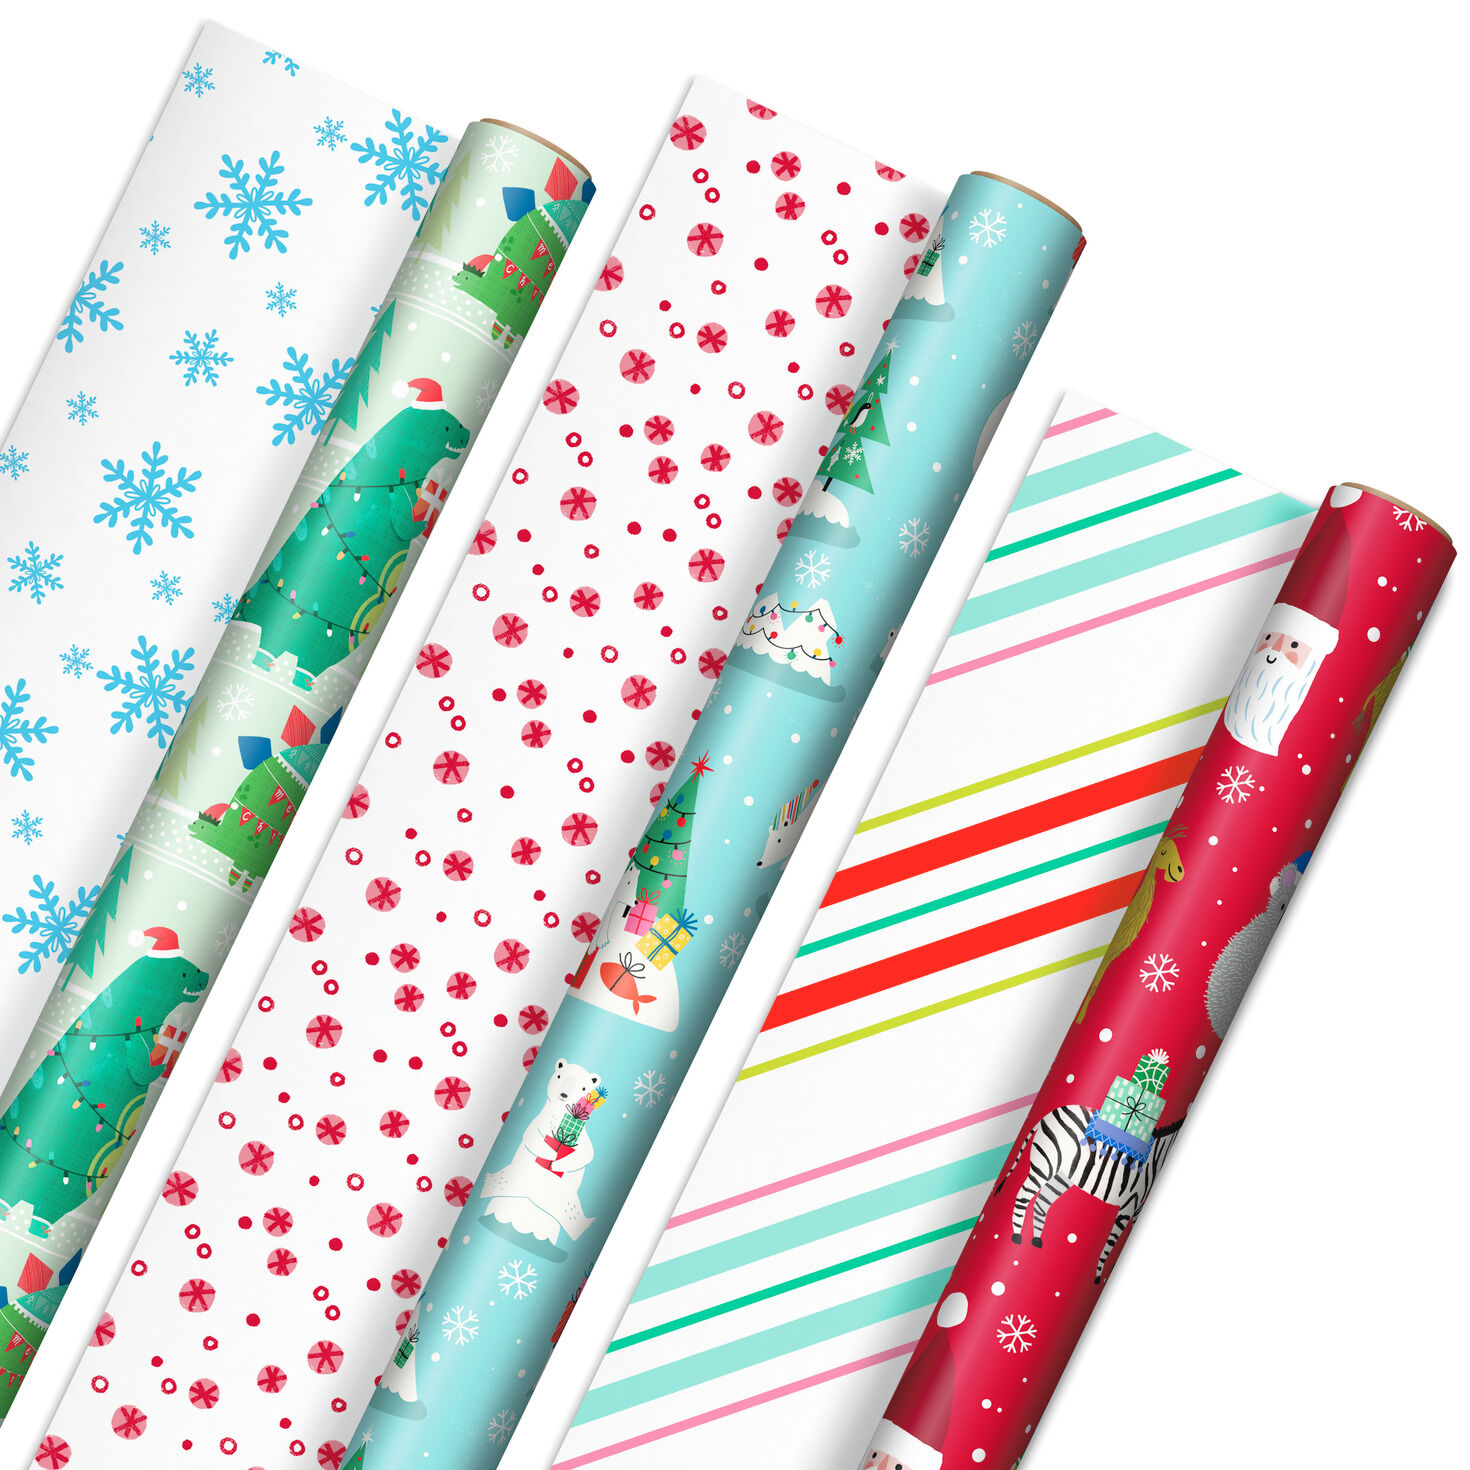 Sweet Birthday 3-Pack Reversible Wrapping Paper, 75 sq. ft. total -  Wrapping Paper Sets - Hallmark